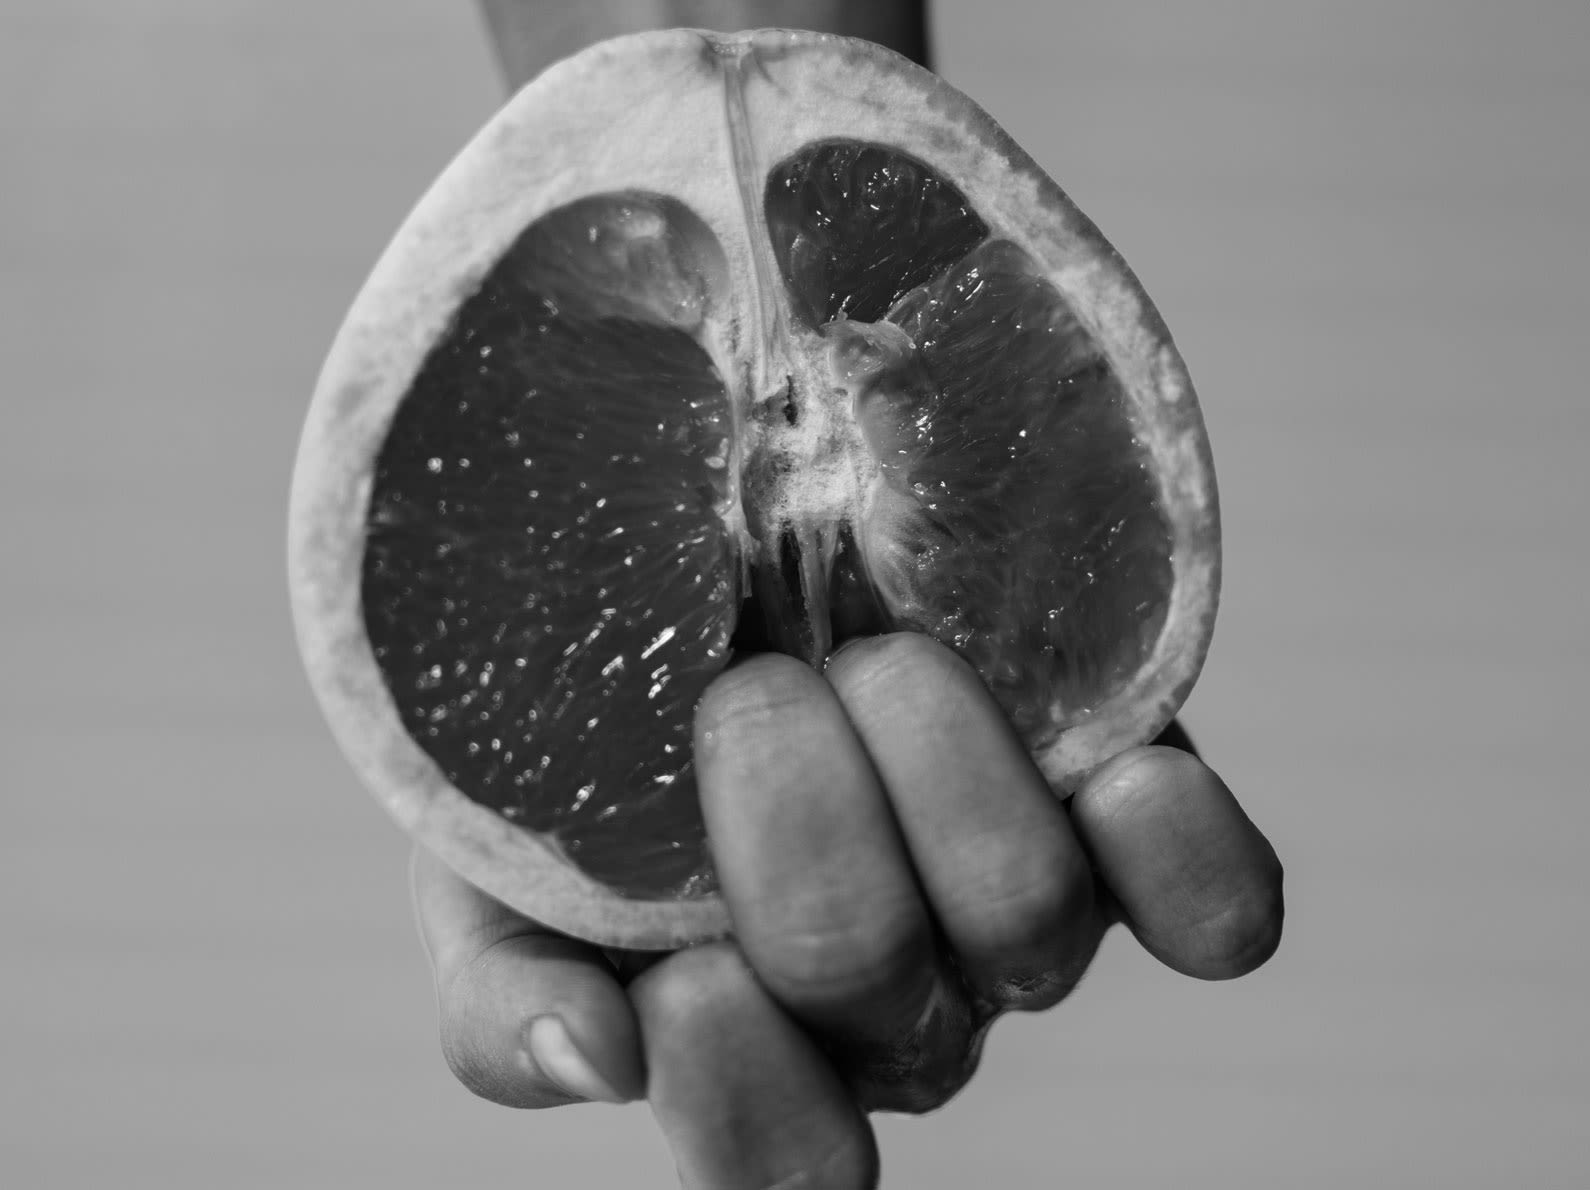 Sliced grapefruit with hand and fingers